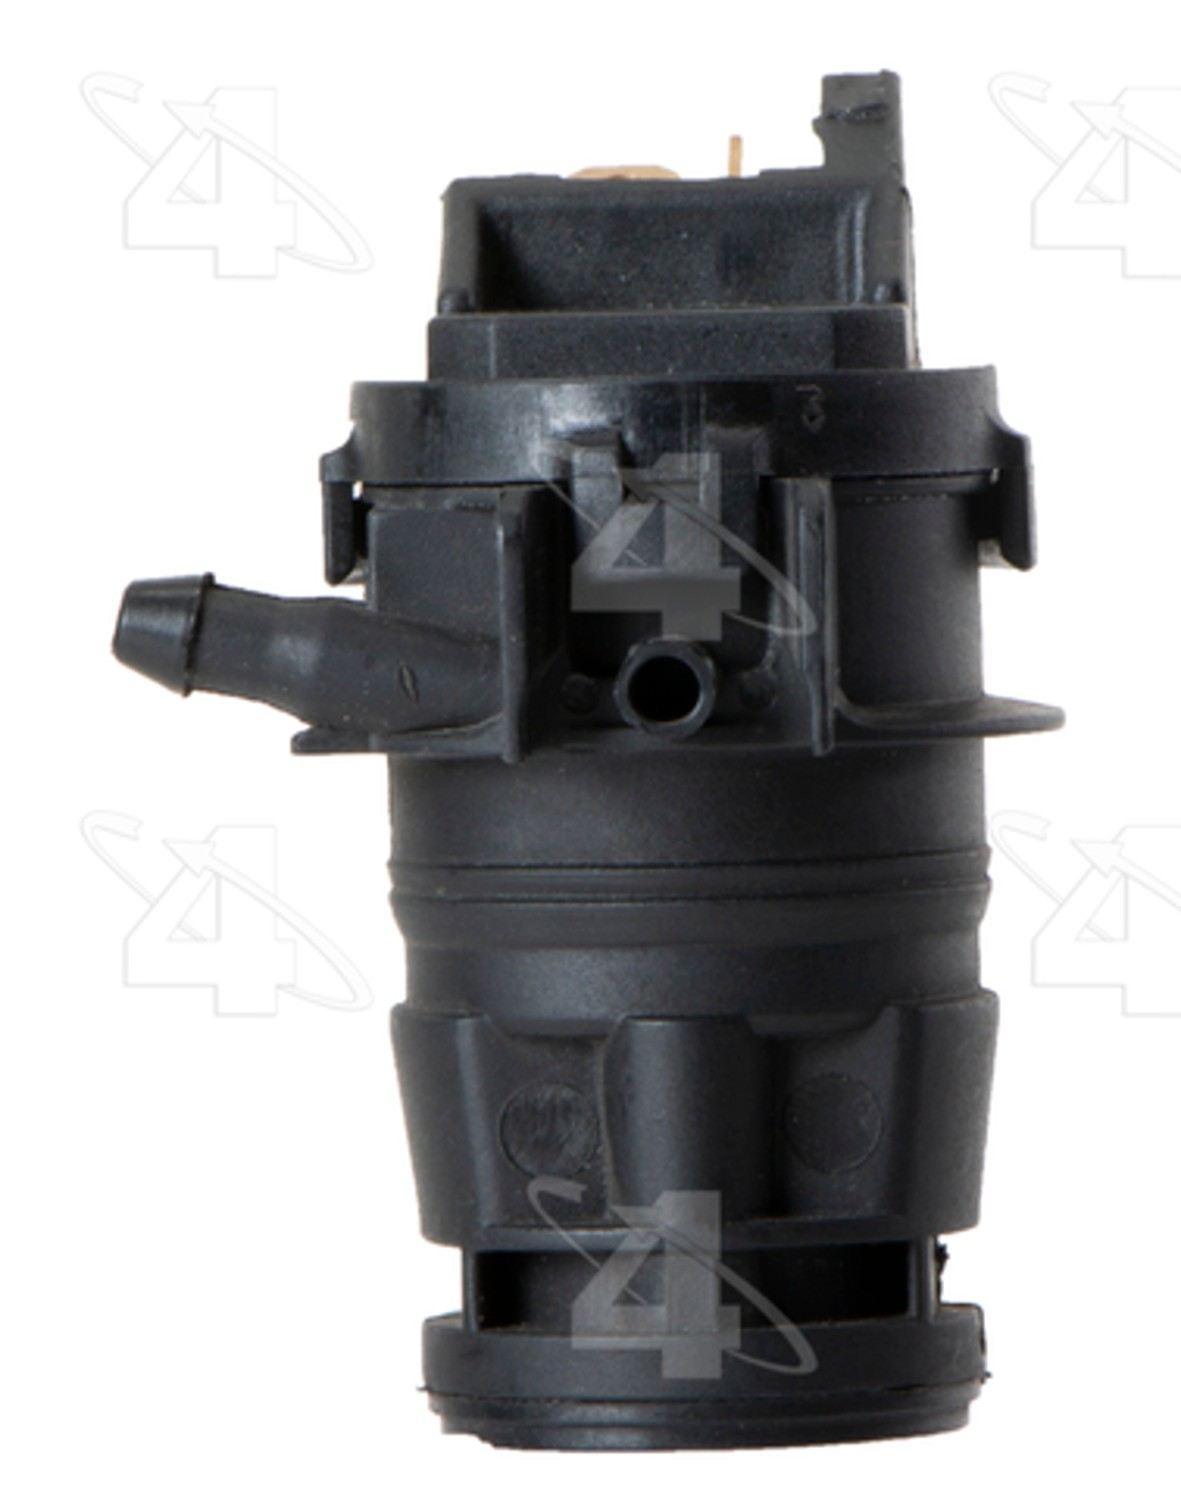 Back View of Front Windshield Washer Pump ACI 377155